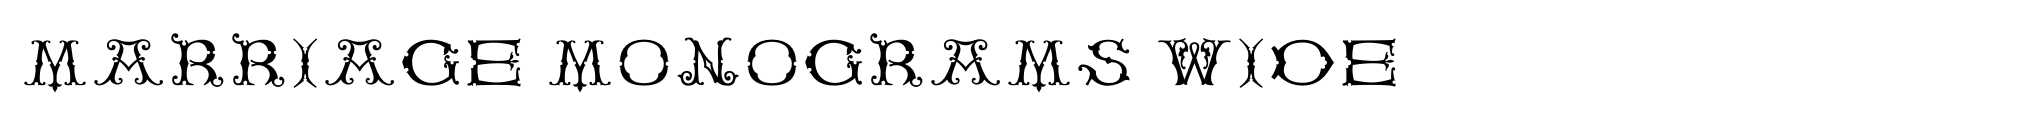 Marriage Monograms Wide image